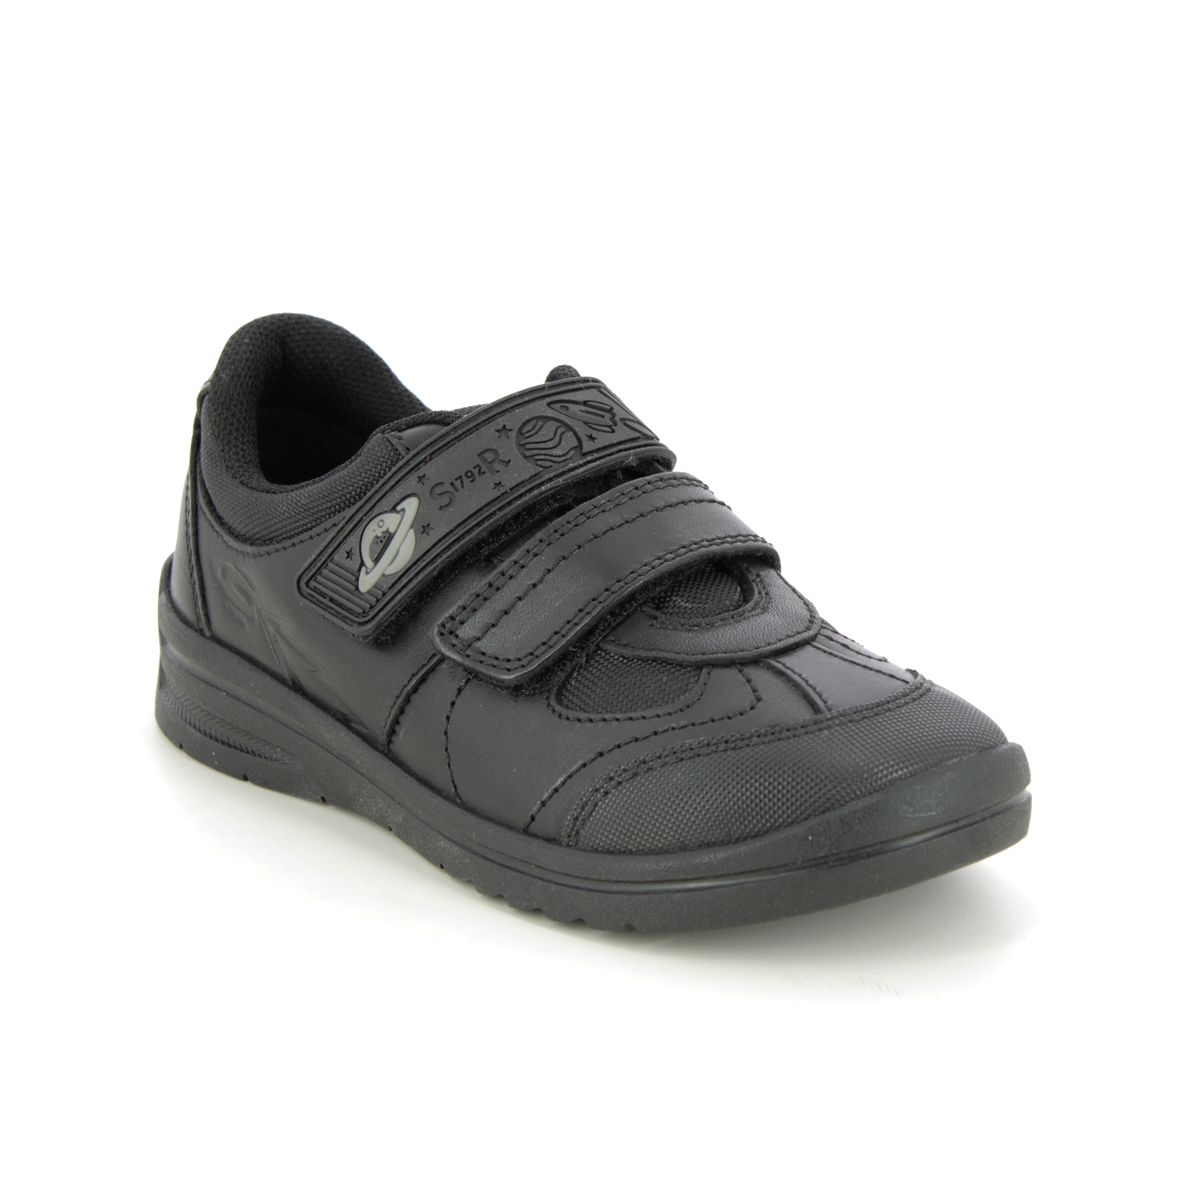 Start Rite - Rocket 2V In Black Leather 2797-75E In Size 10.5 In Plain Black Leather For School Boys Shoes  In Black Leather For kids